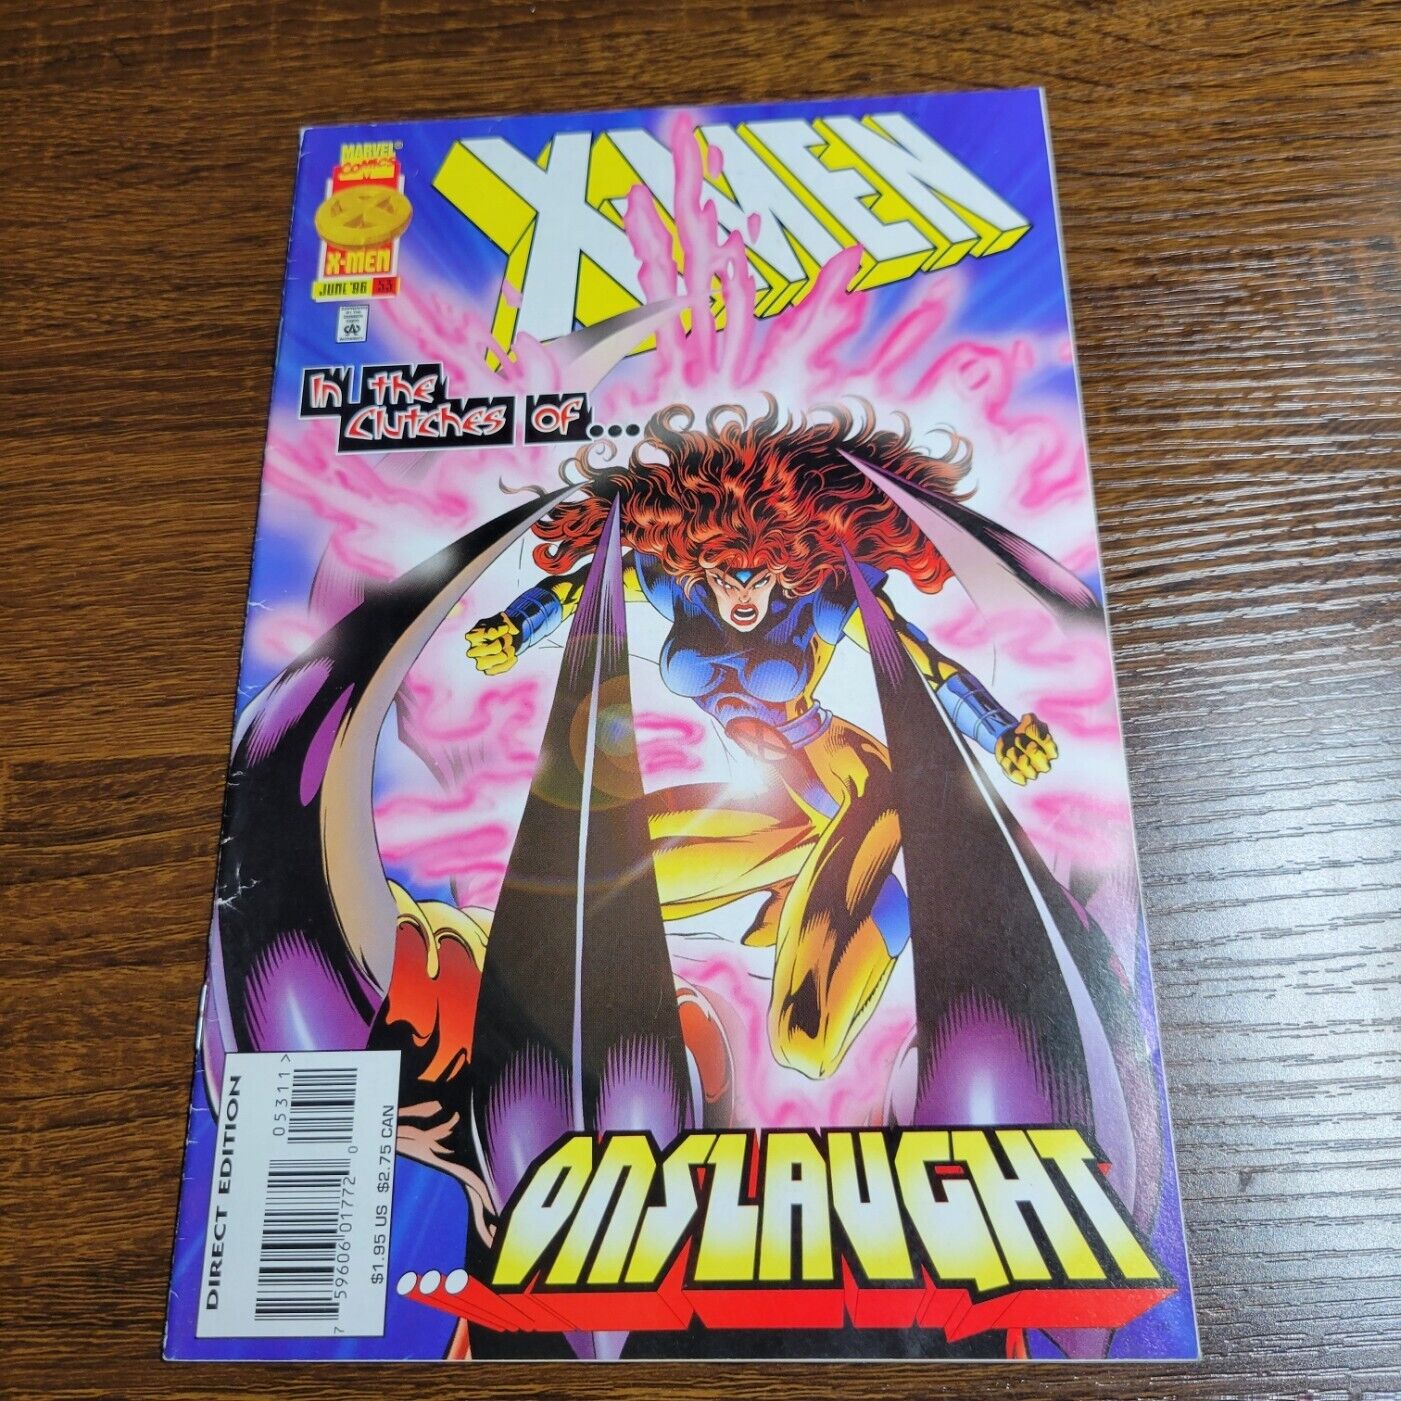 X-Men #53, volume 2. First appearance of Onslaught. Marvel comics